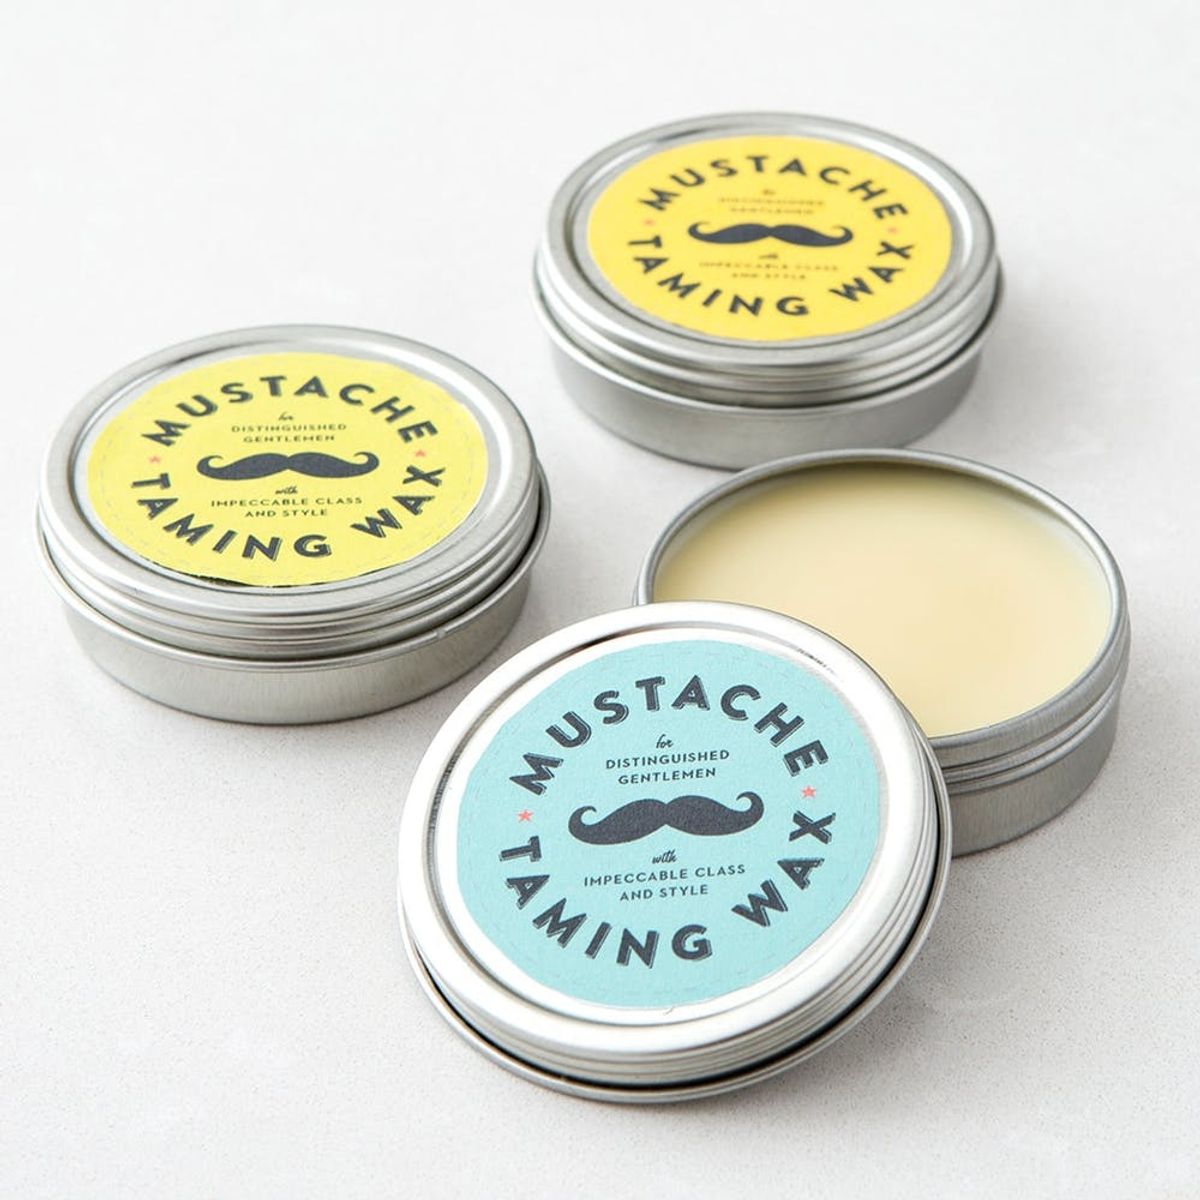 Tame That Handlebar With This 2-Ingredient Mustache Wax